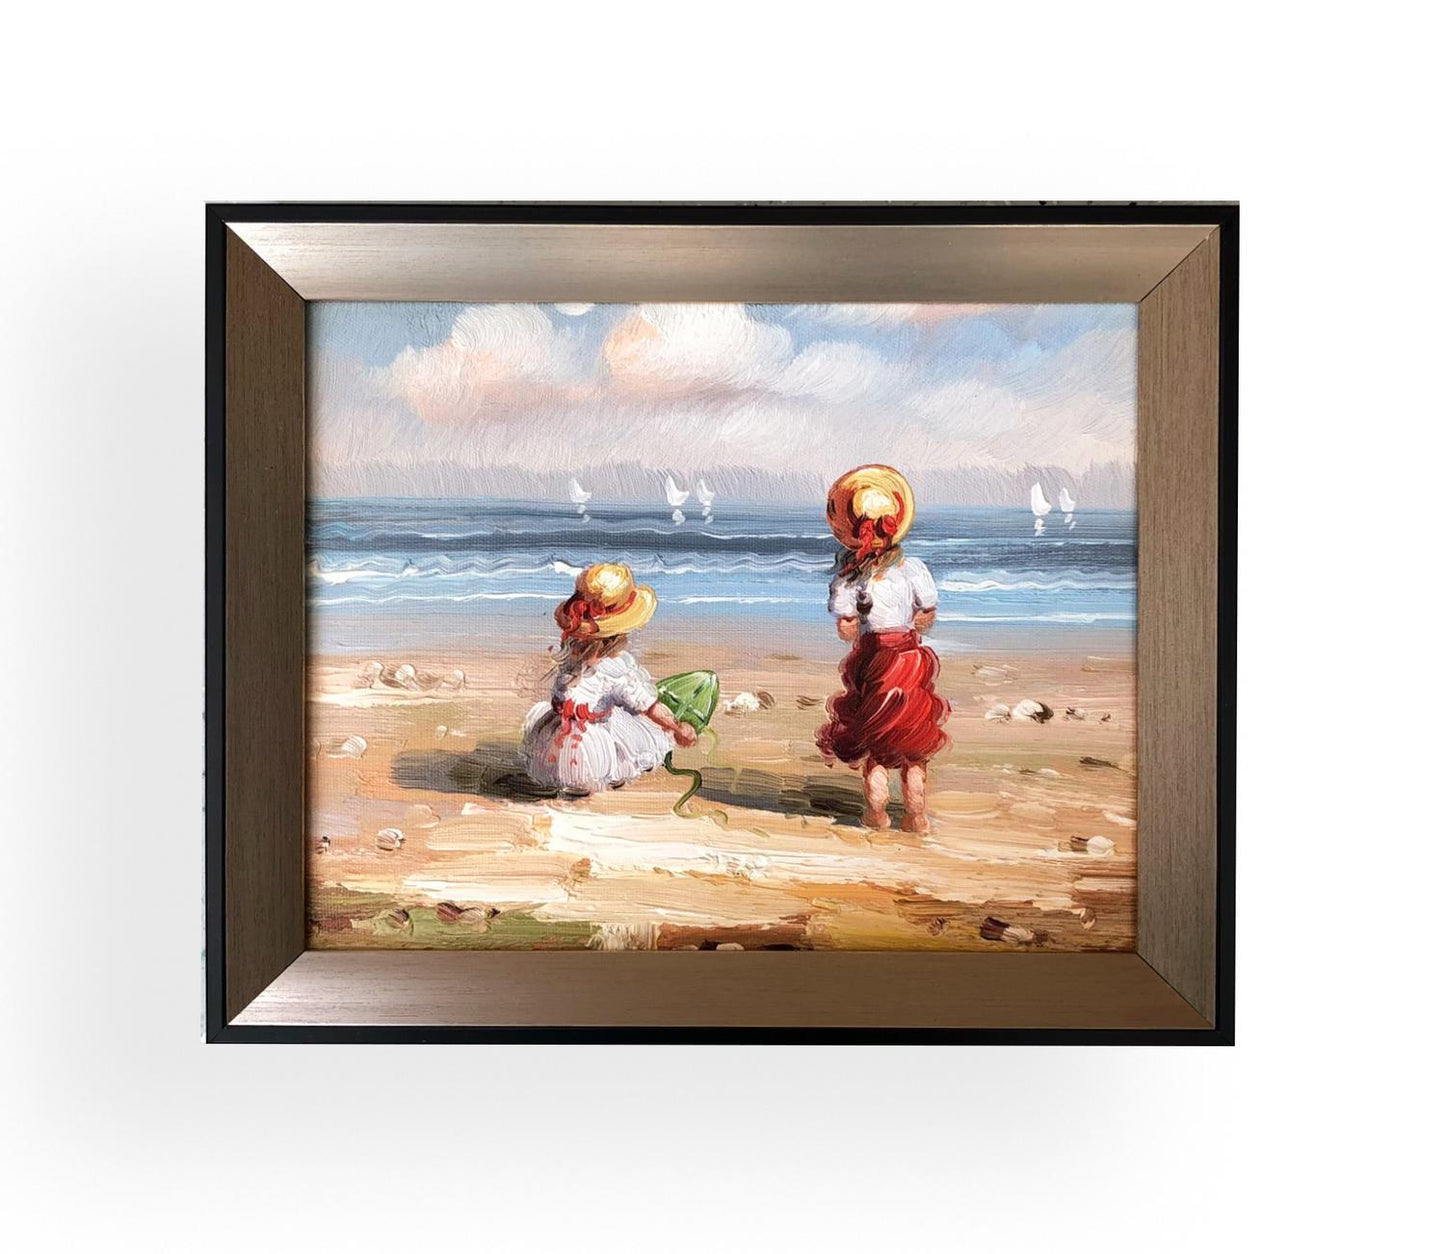 Children play on beach with fantastic frame, inner size 20x25 cm